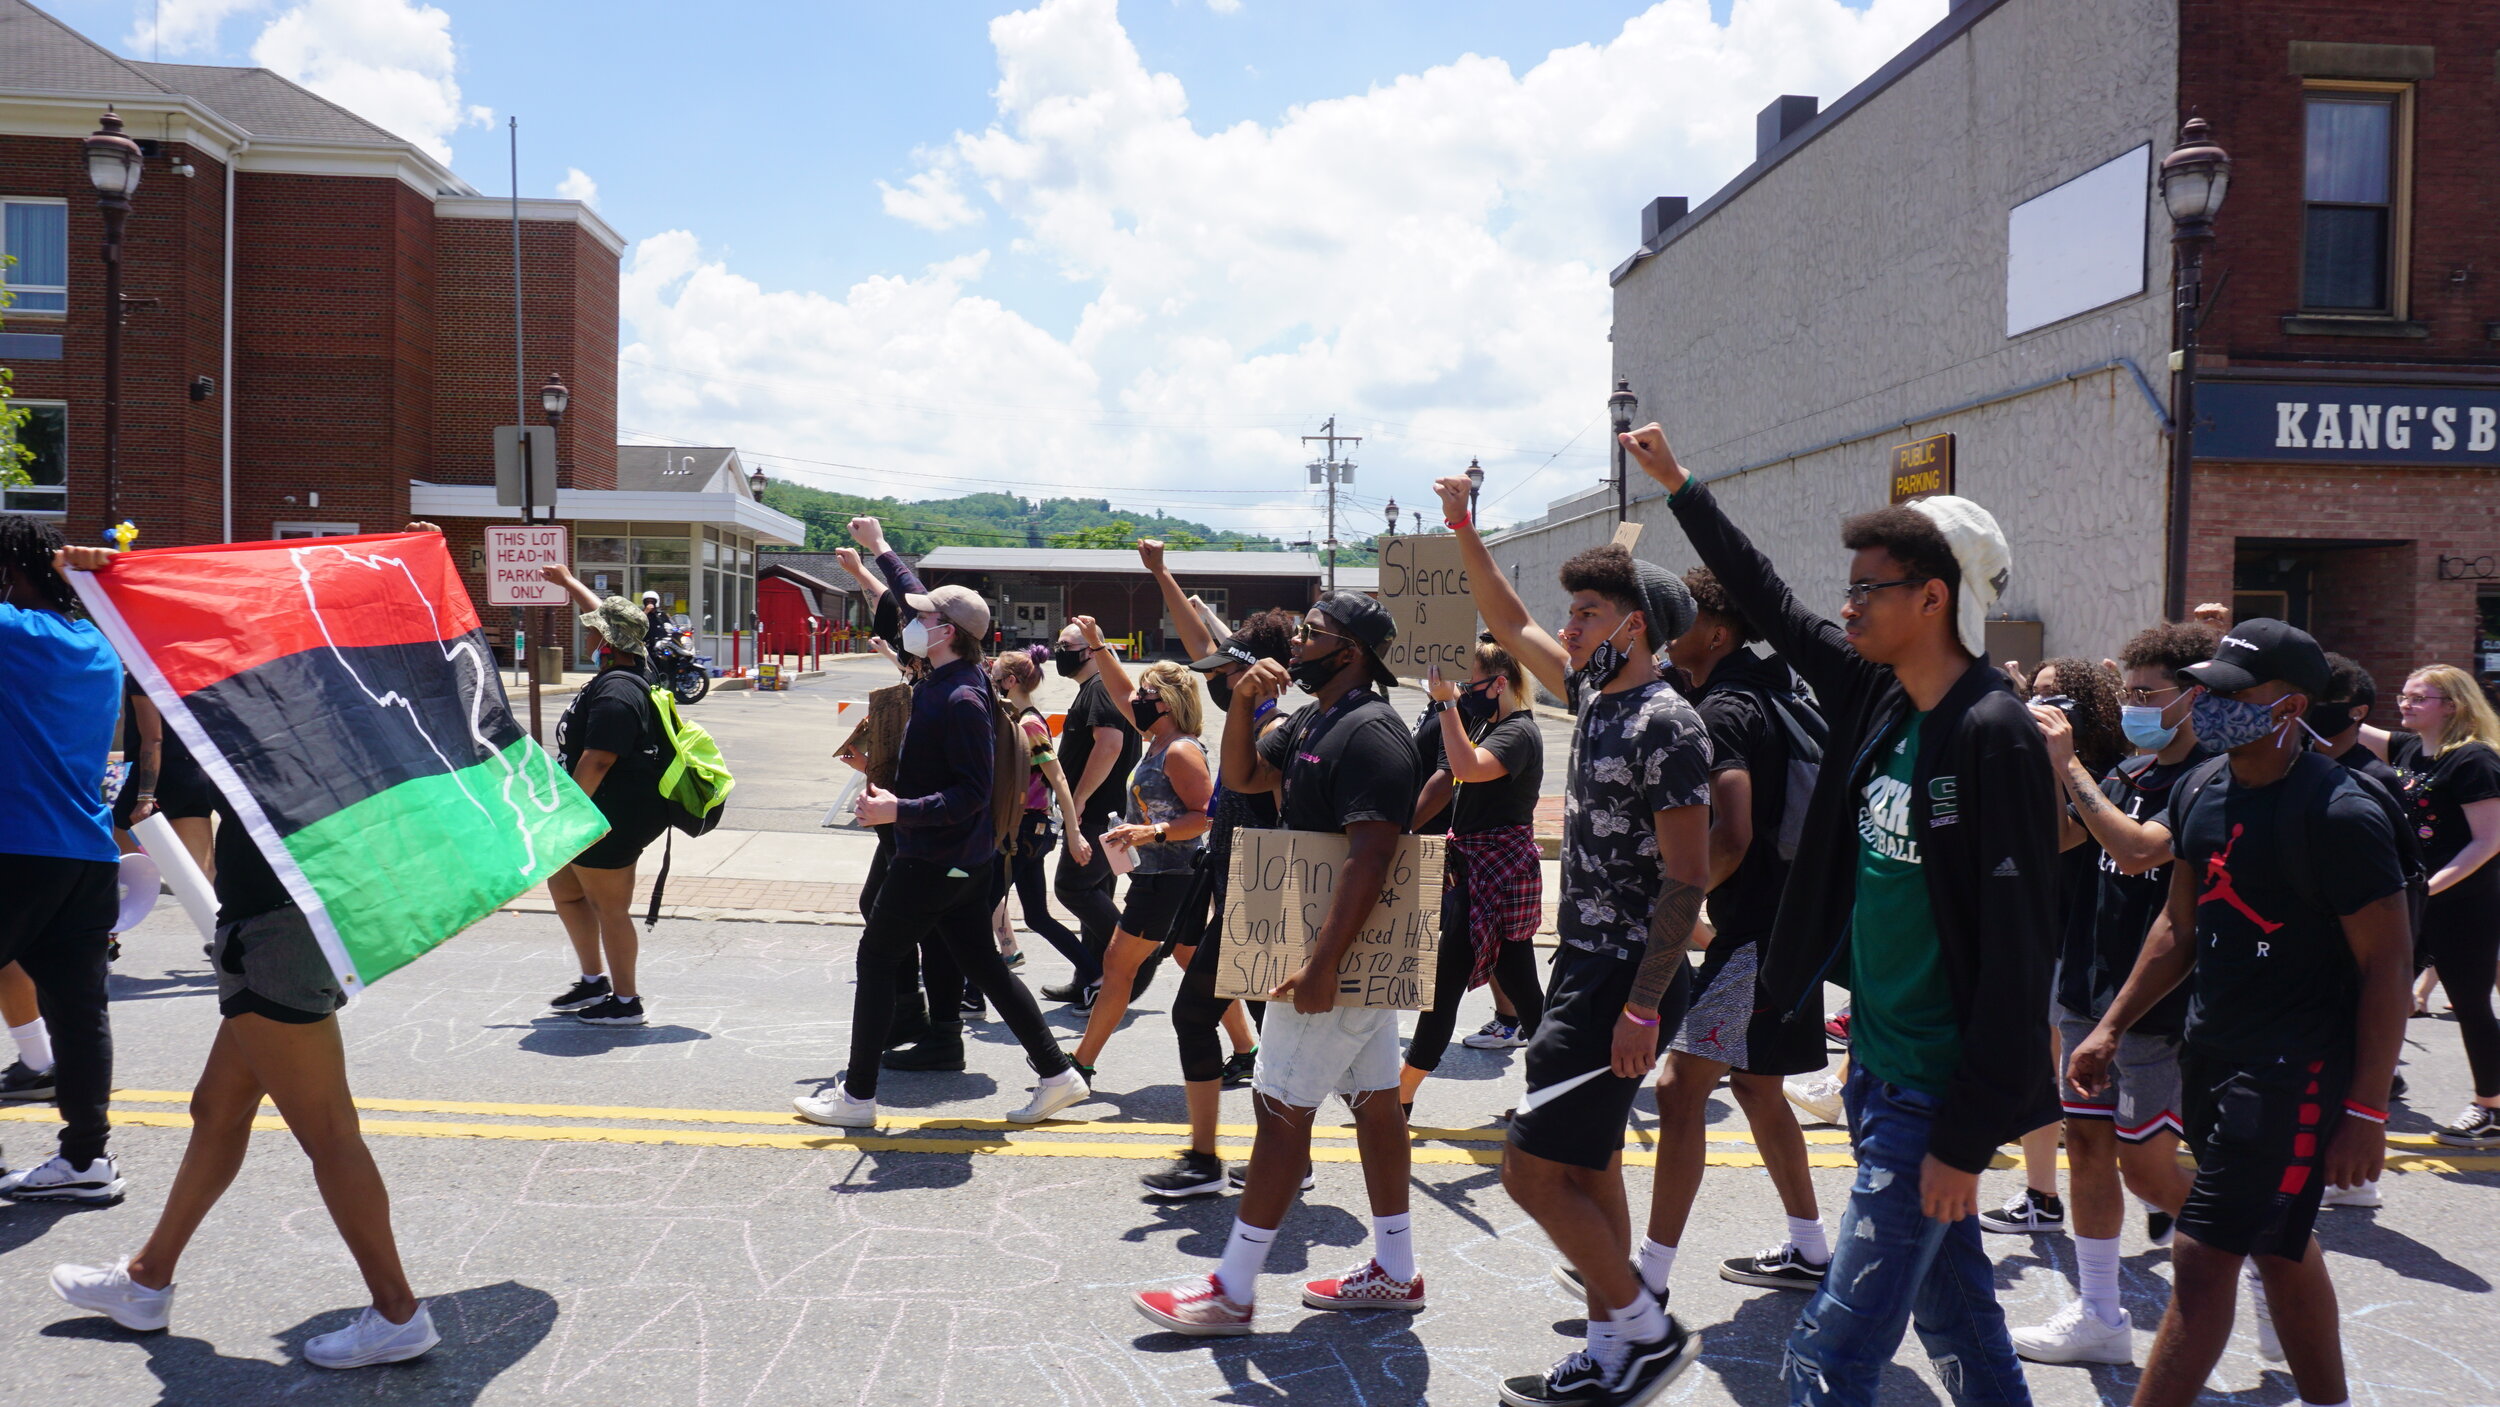 Black Lives Matter March in Canonsburg in June 2020  Source: Kristen Locy